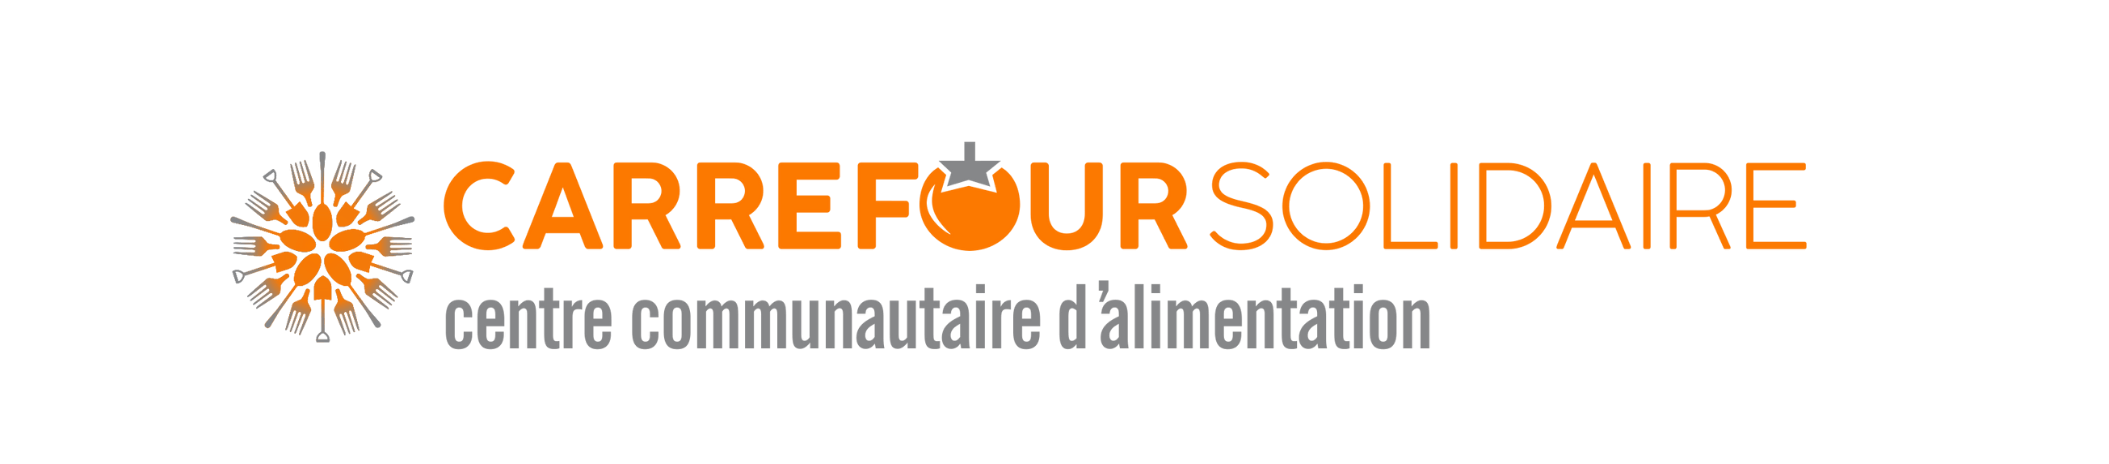 Carrefour solidaire CCA